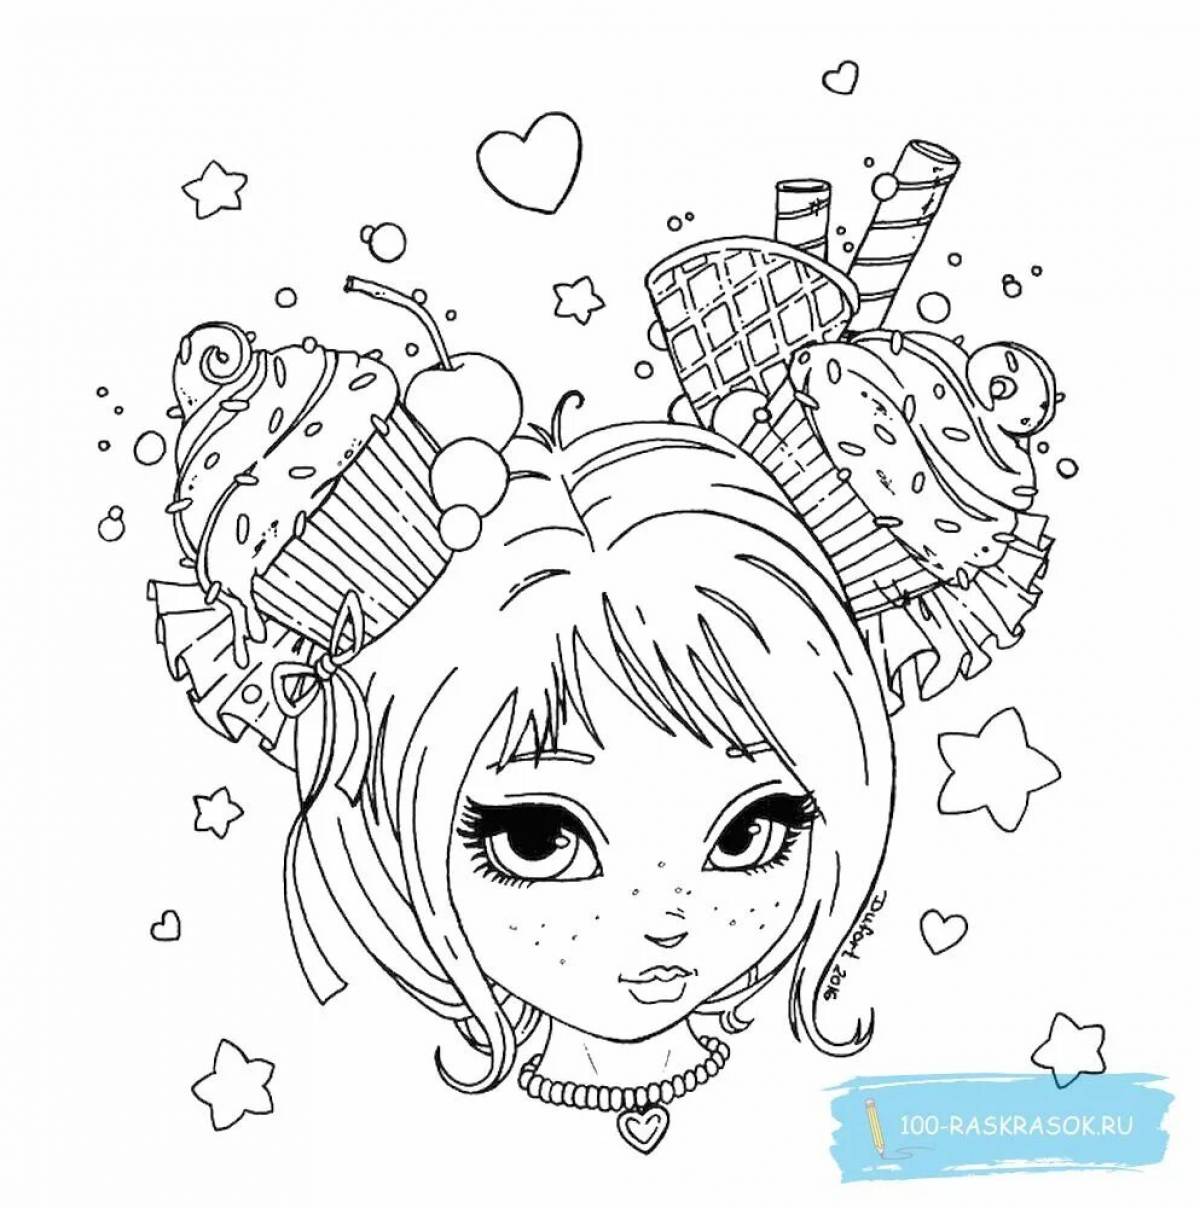 Exquisite cute girl coloring book